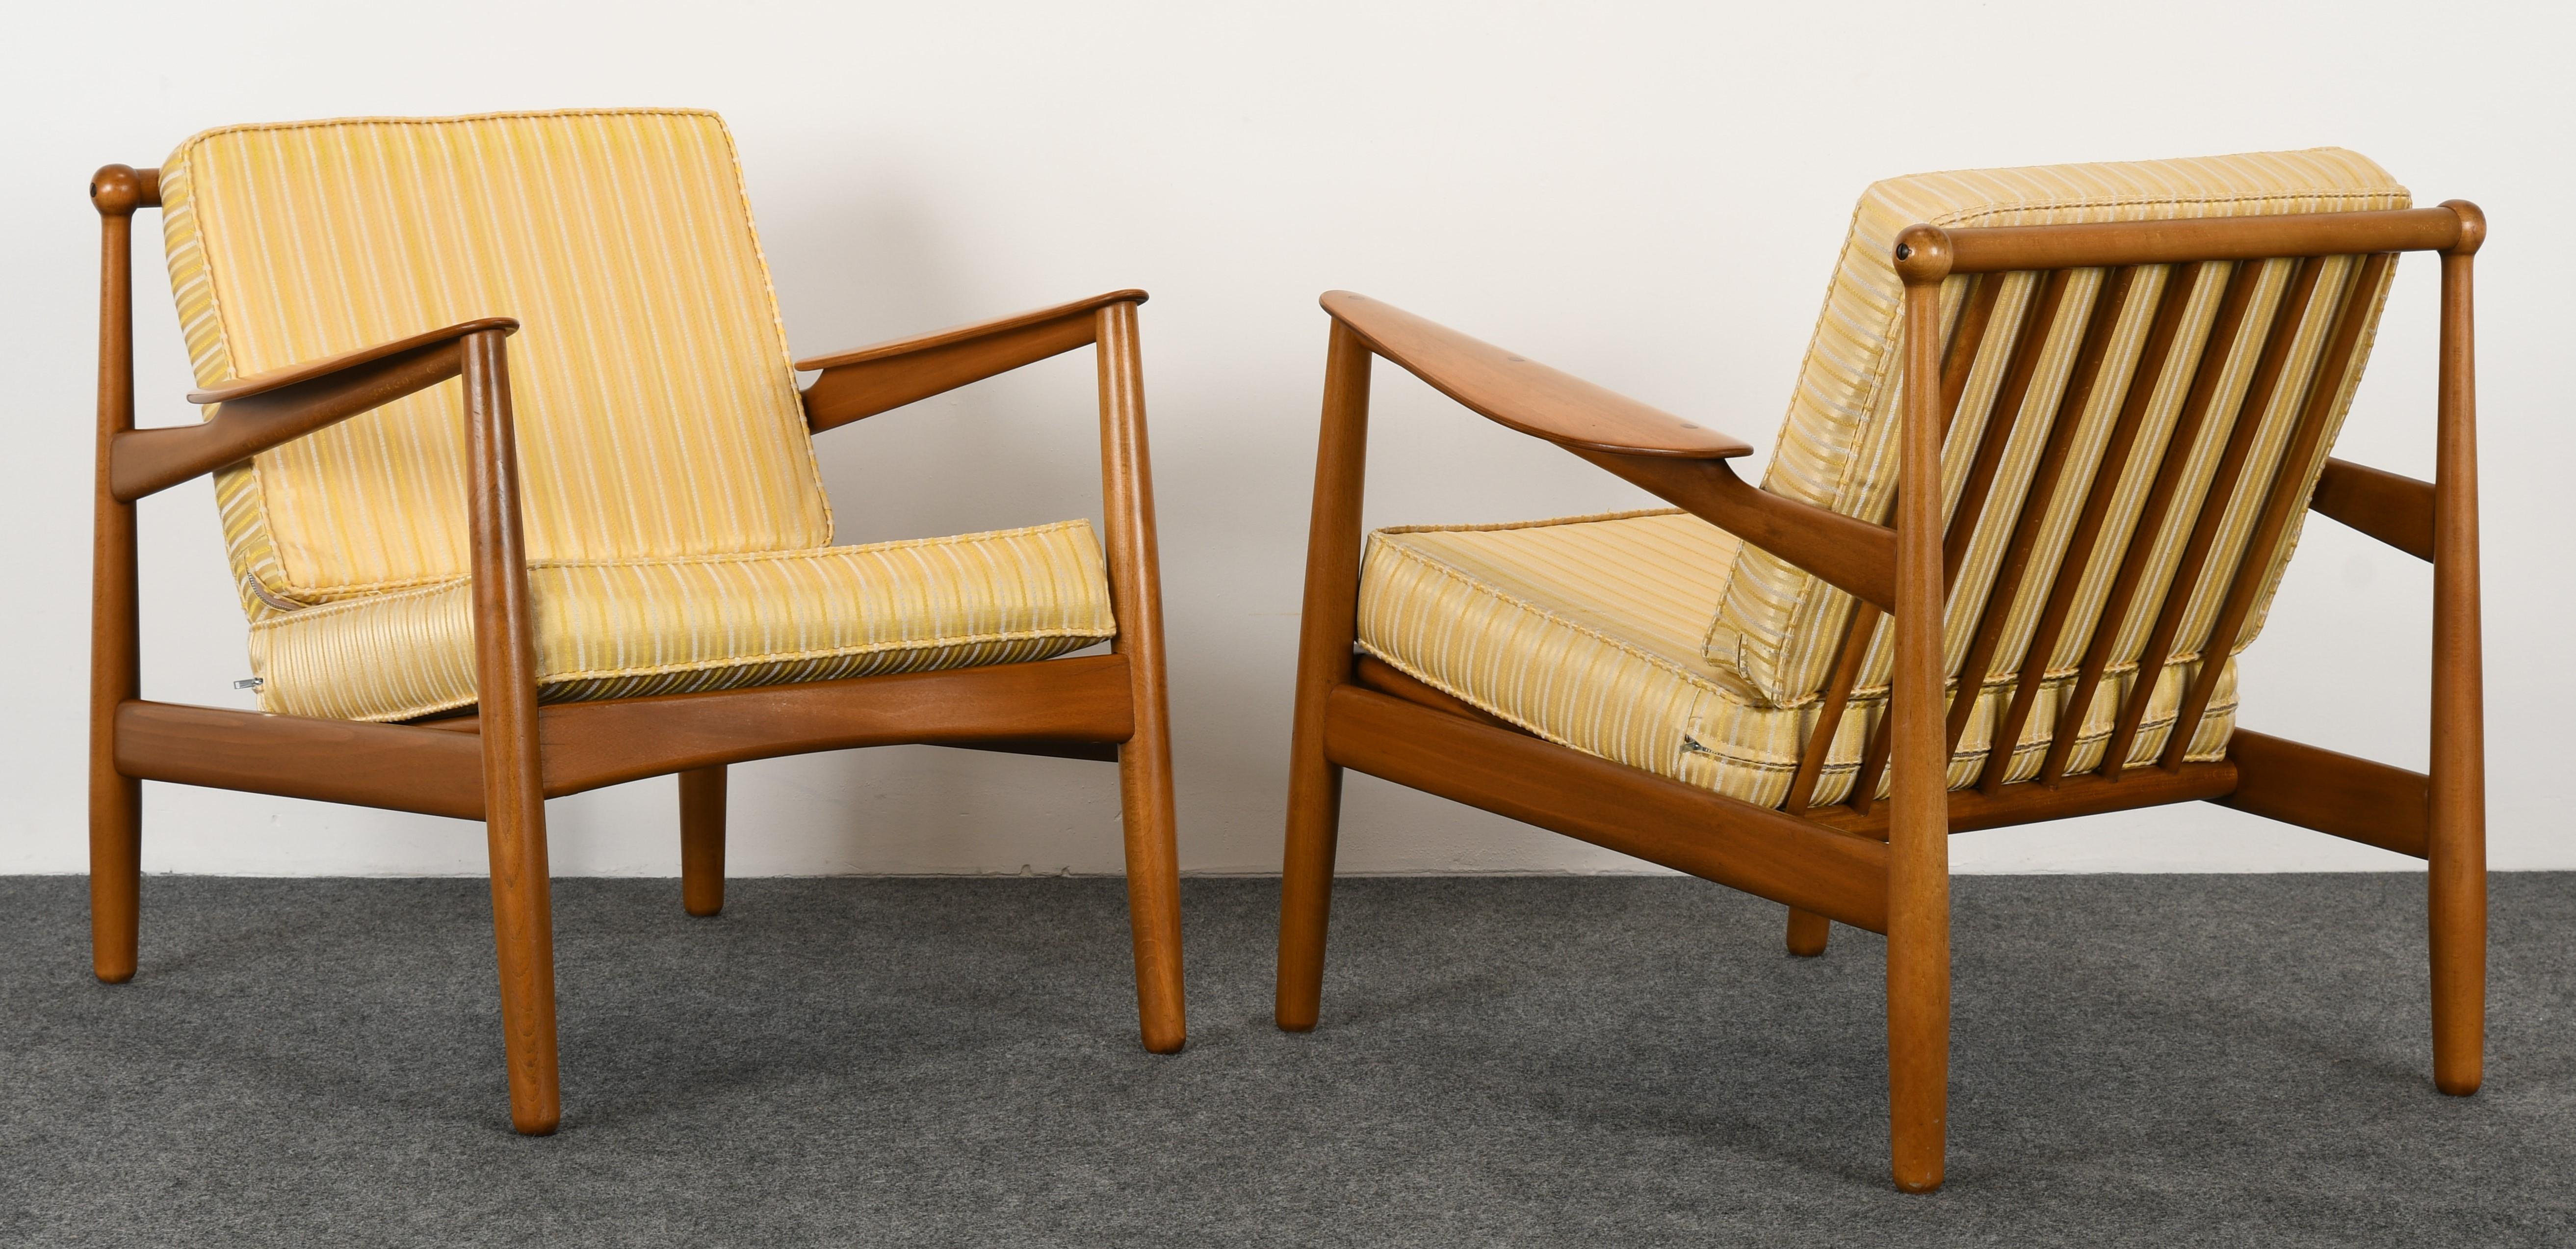 A sleek pair of Danish modern chairs by P. Jeppesen. This particular model is nearly identical to the Easy Chair model 401 by Arne Hovmand-Olsen, although there are slight differences in design, both chairs were manufactured by the same company.